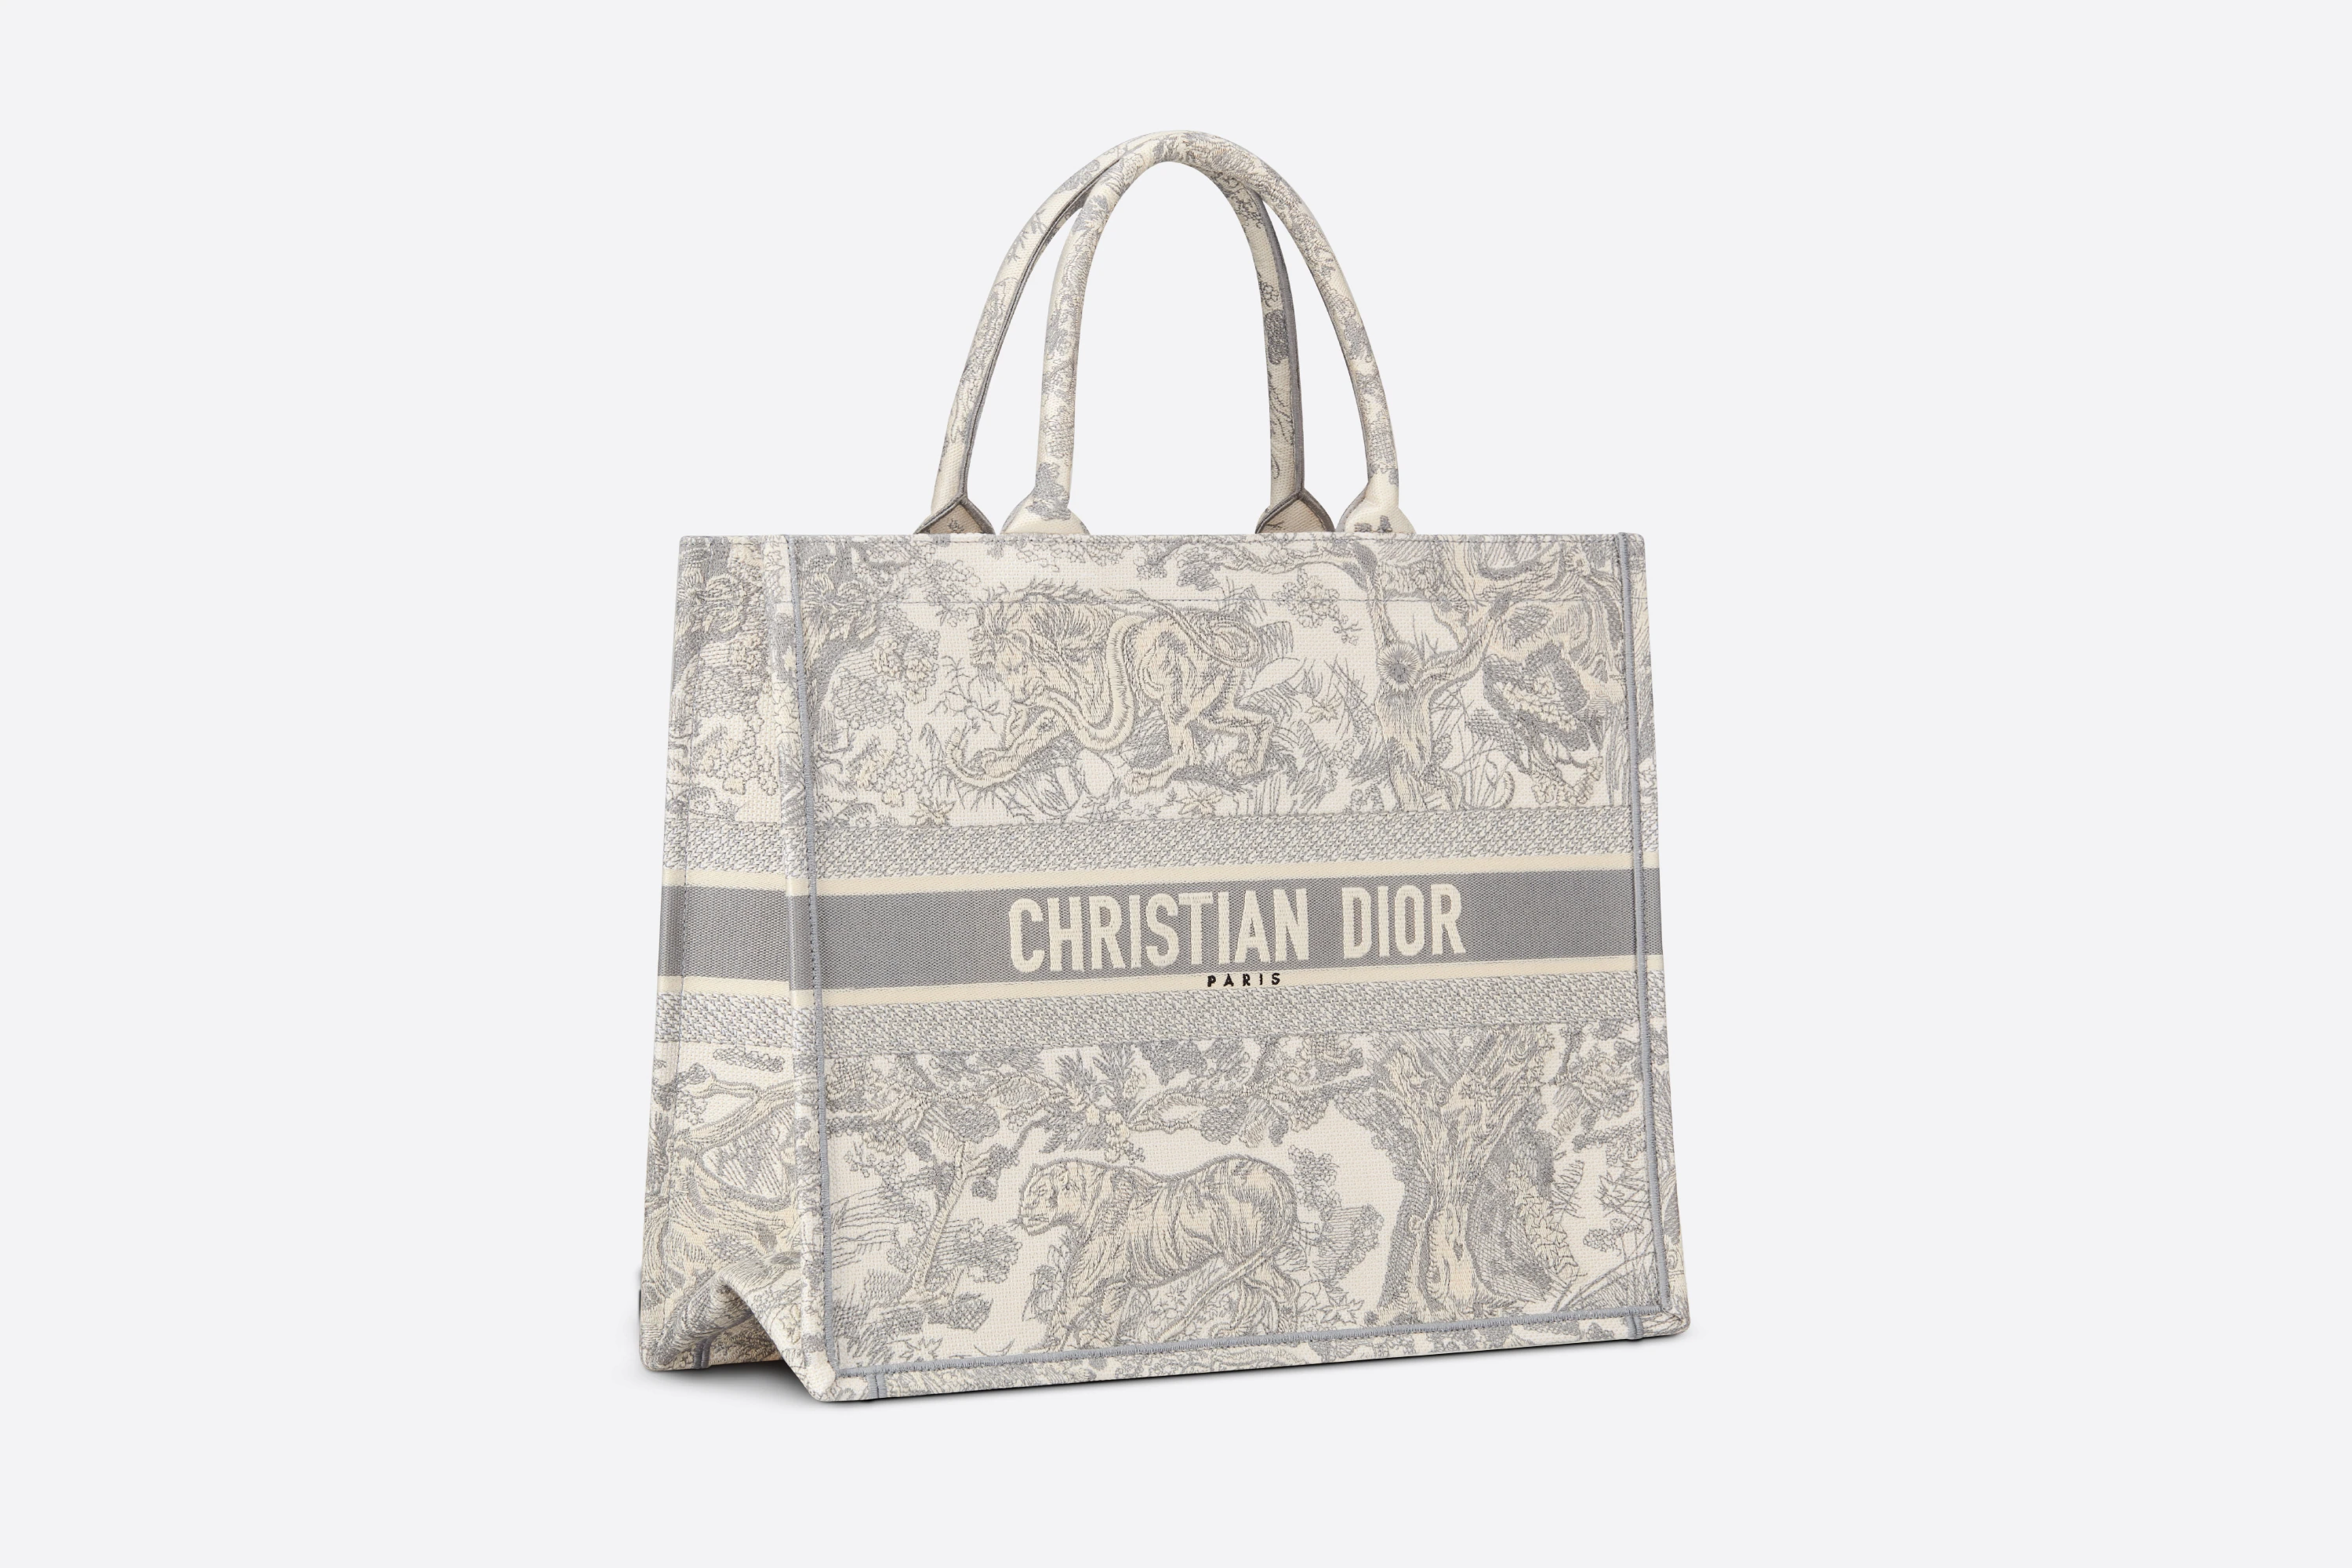 Christian Dior Tote Bags To Invest In 2023